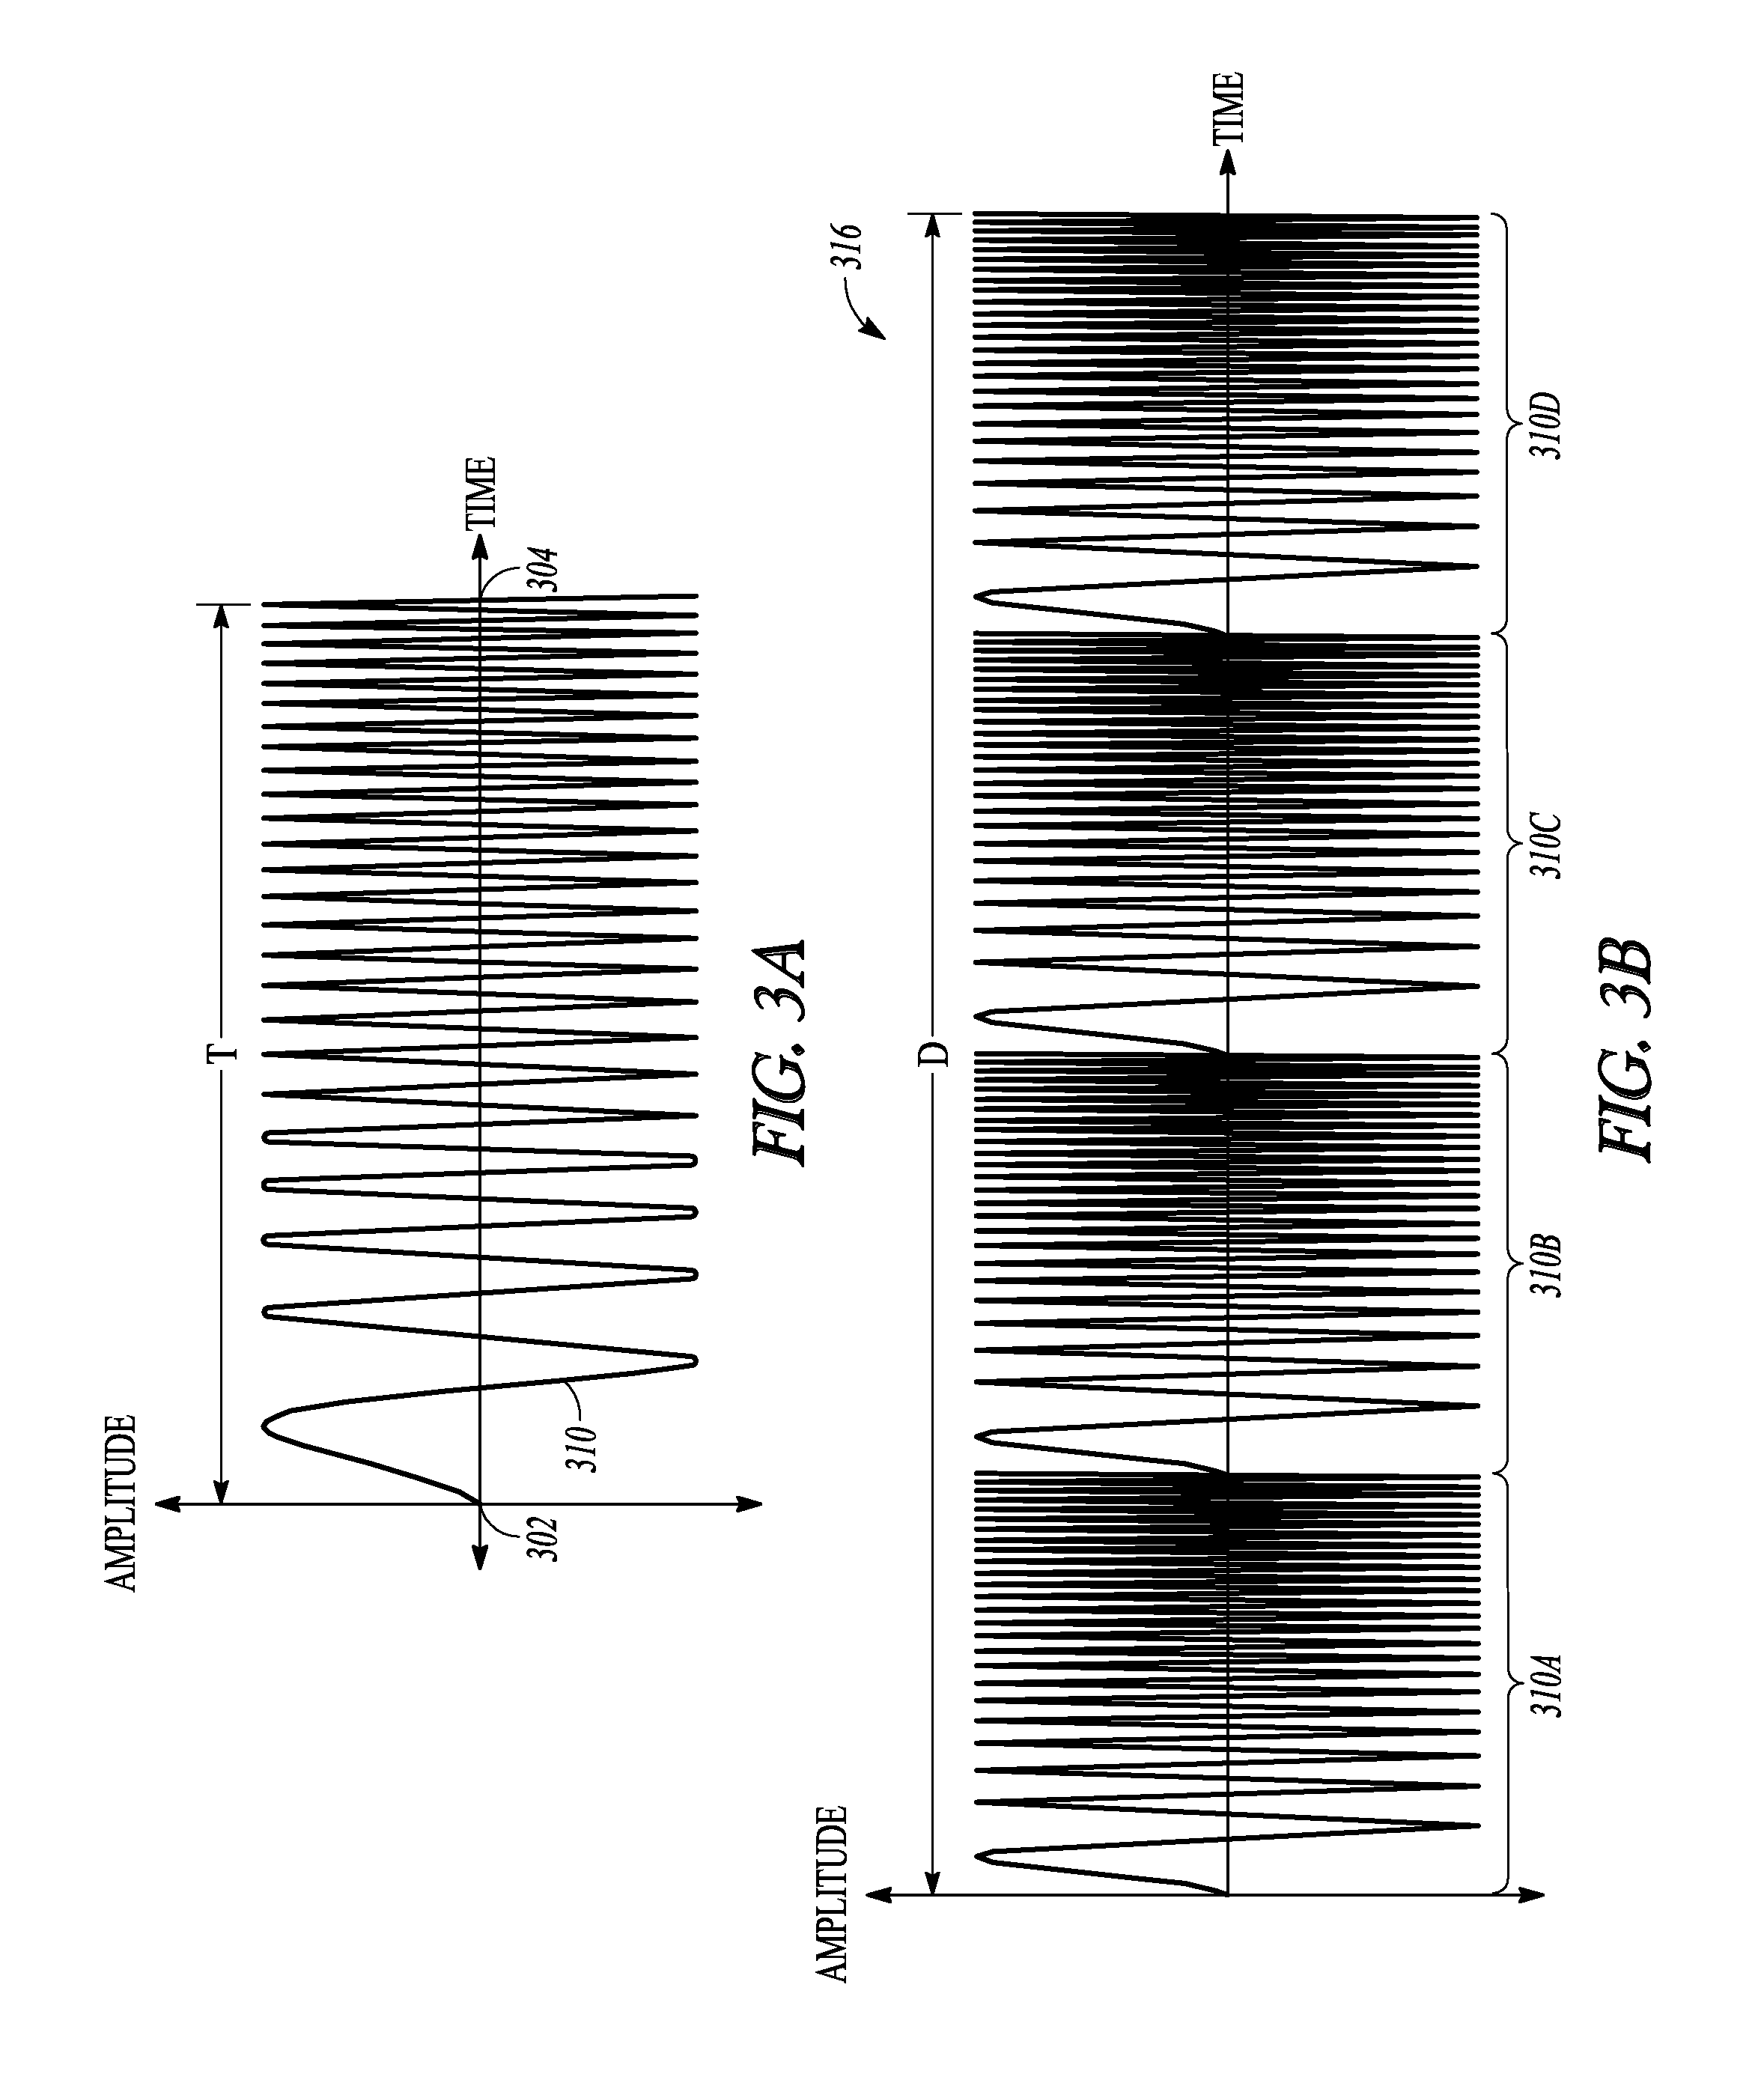 Chirped pulse frequency-domain comb for spectroscopy